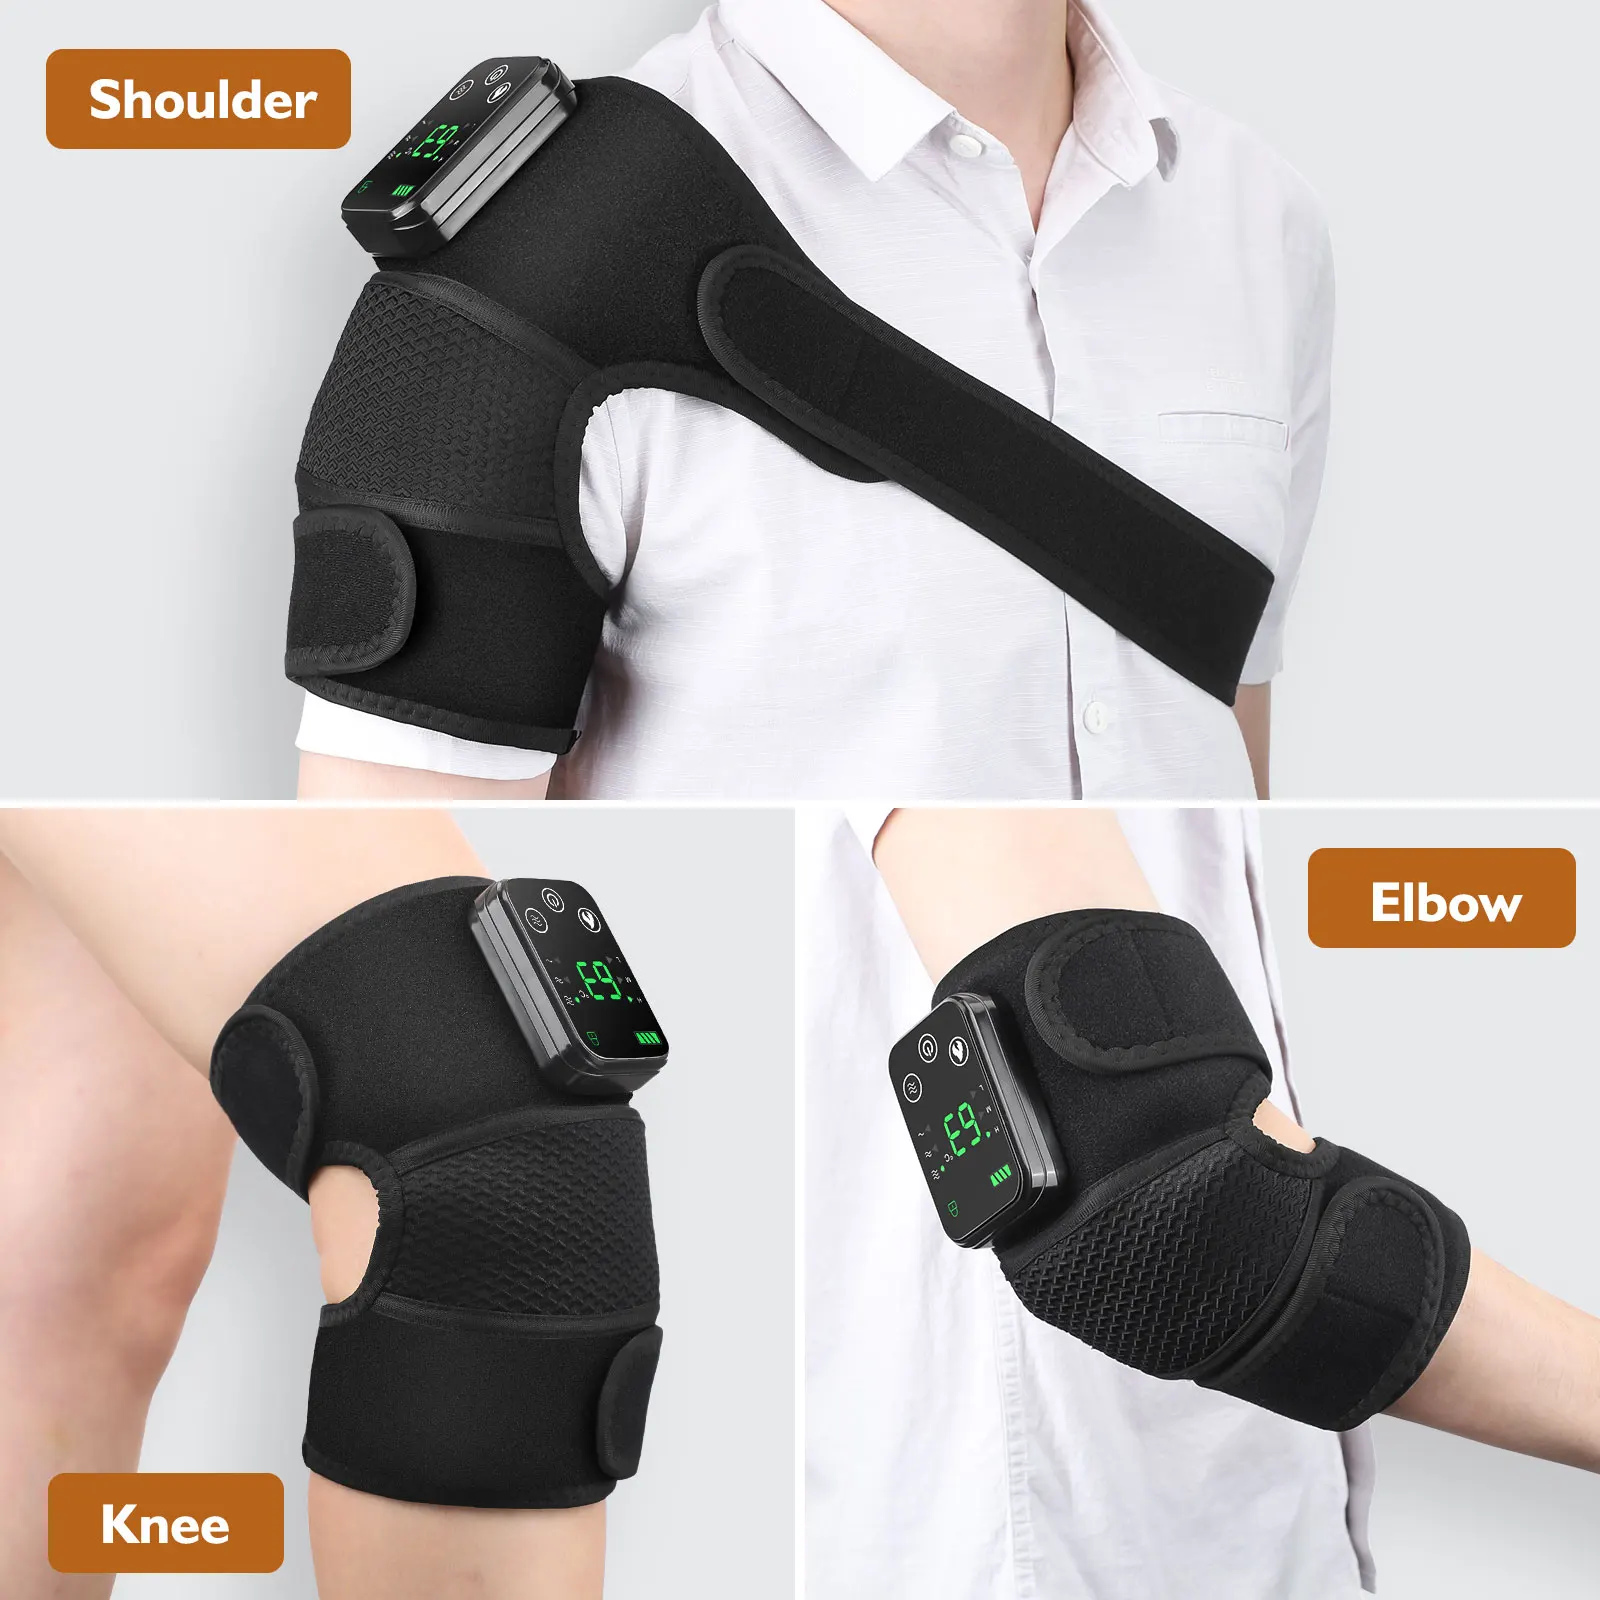 https://ae01.alicdn.com/kf/S1f2ddf9f85c9414592b2471eaea4c6f7d/Electric-Heating-Knee-Massage-Belt-Far-Infrared-Joint-Physiotherapy-Vibrator-Knee-Warm-Support-Brace-Pad-Arthritis.jpg